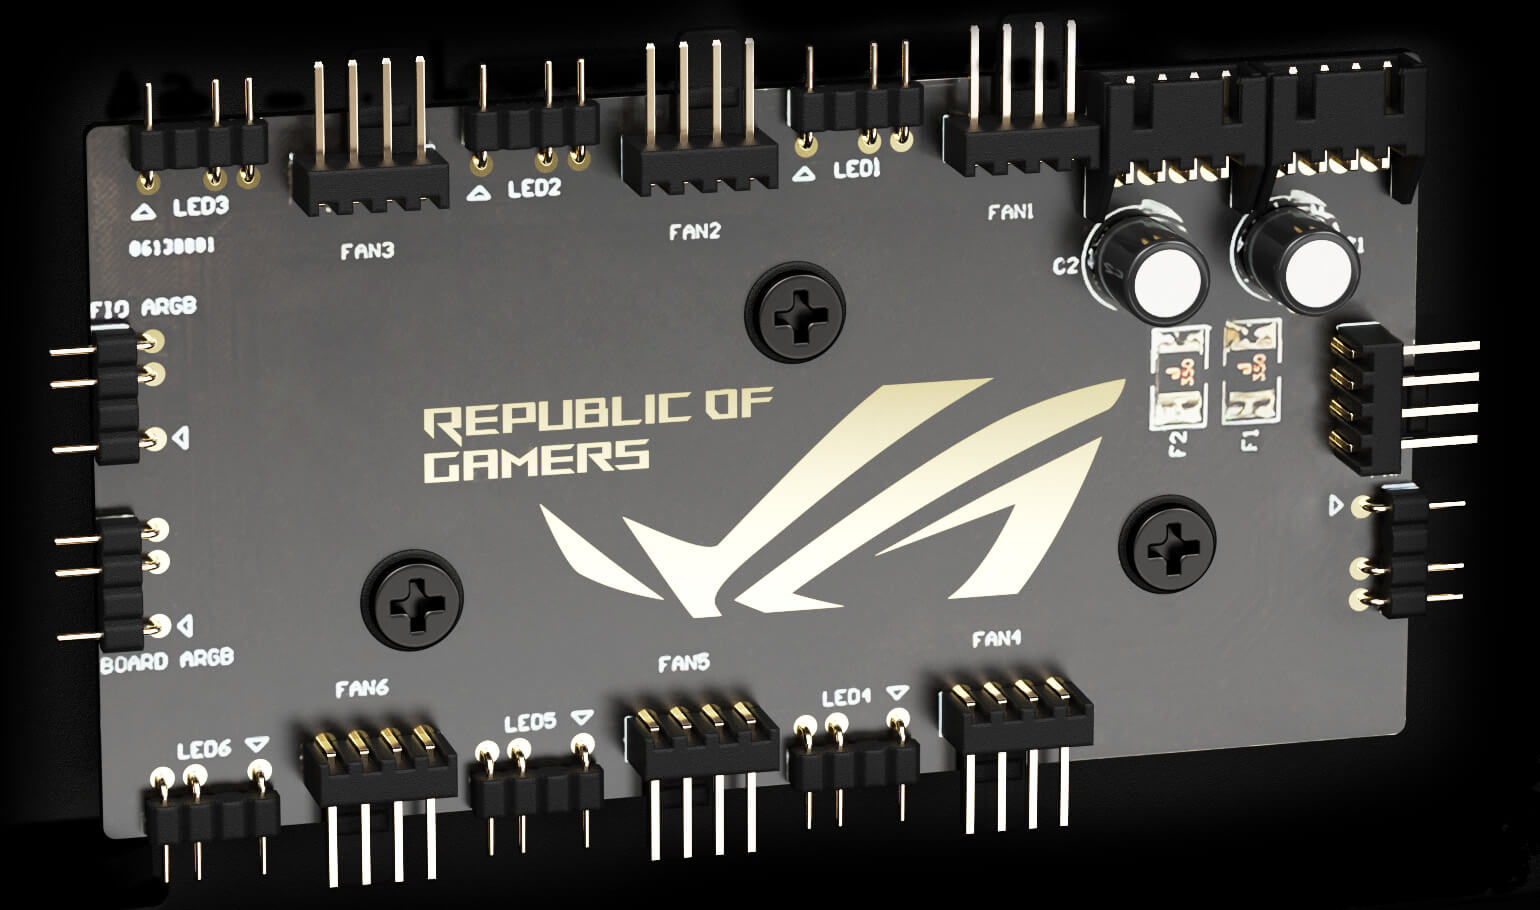 integrated ARGB and fan hub of ROG Hyperion GR701